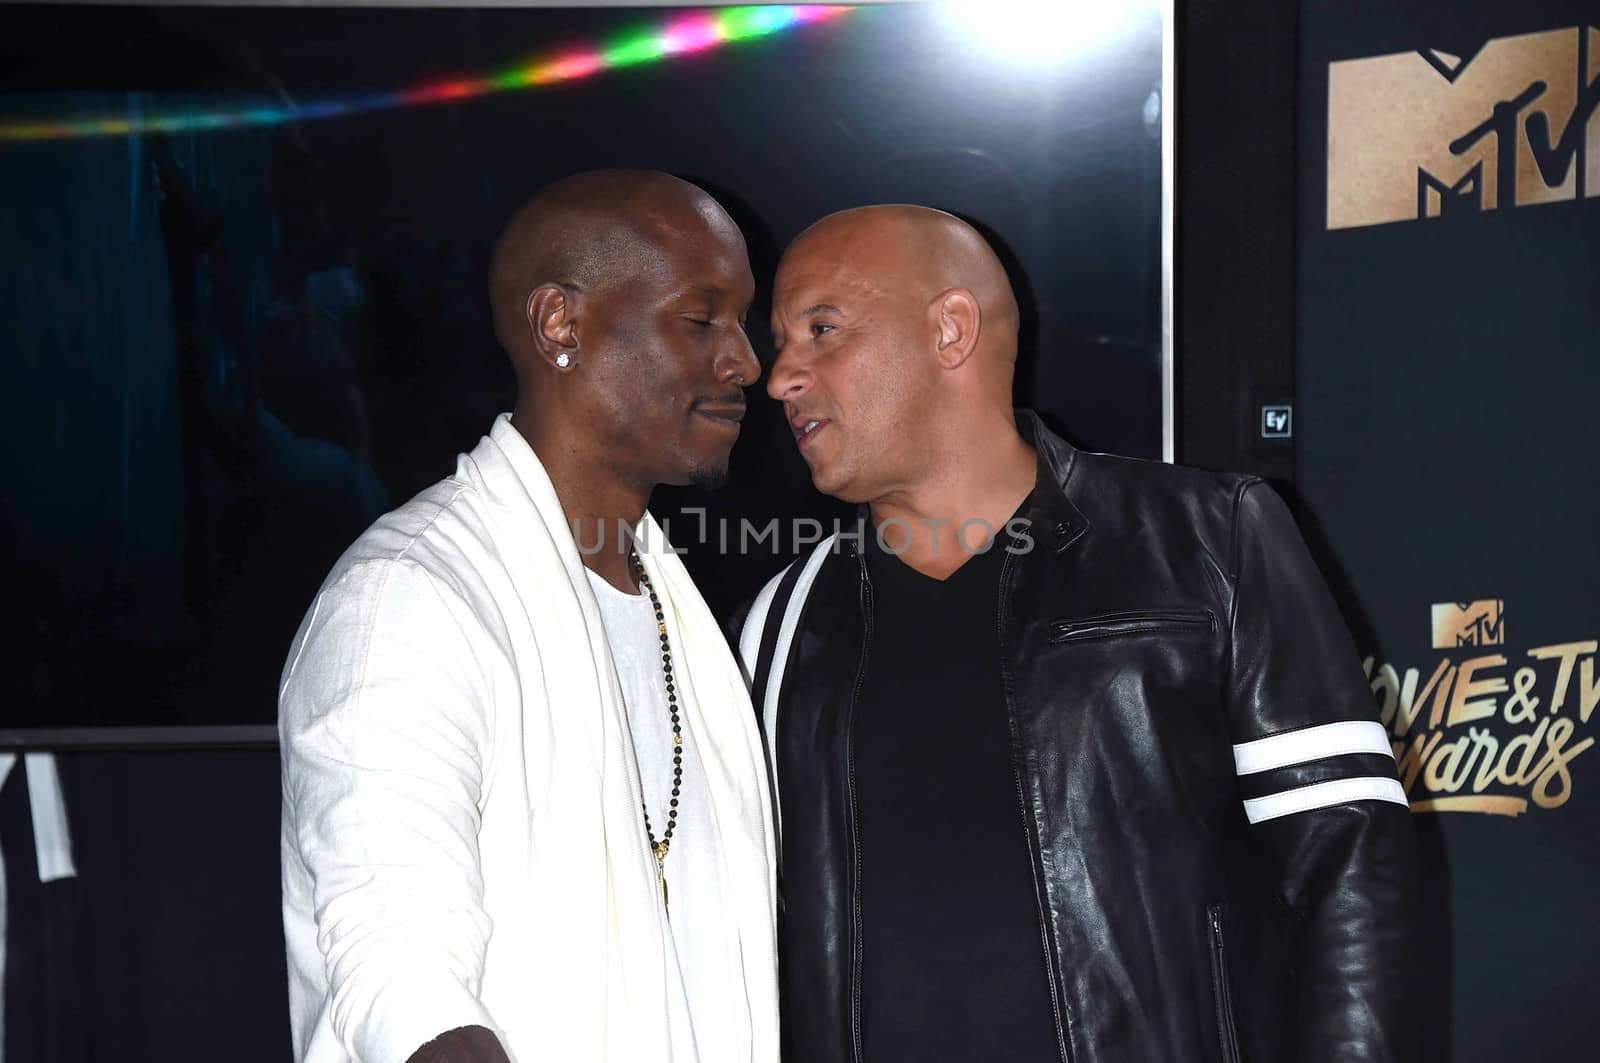 Tyrese Gibson, Vin Diesel at the 2017 MTV Movie & TV Awards, Press Room, Shrine Auditorium, Los Angeles, CA 05-07-17/ImageCollect by ImageCollect